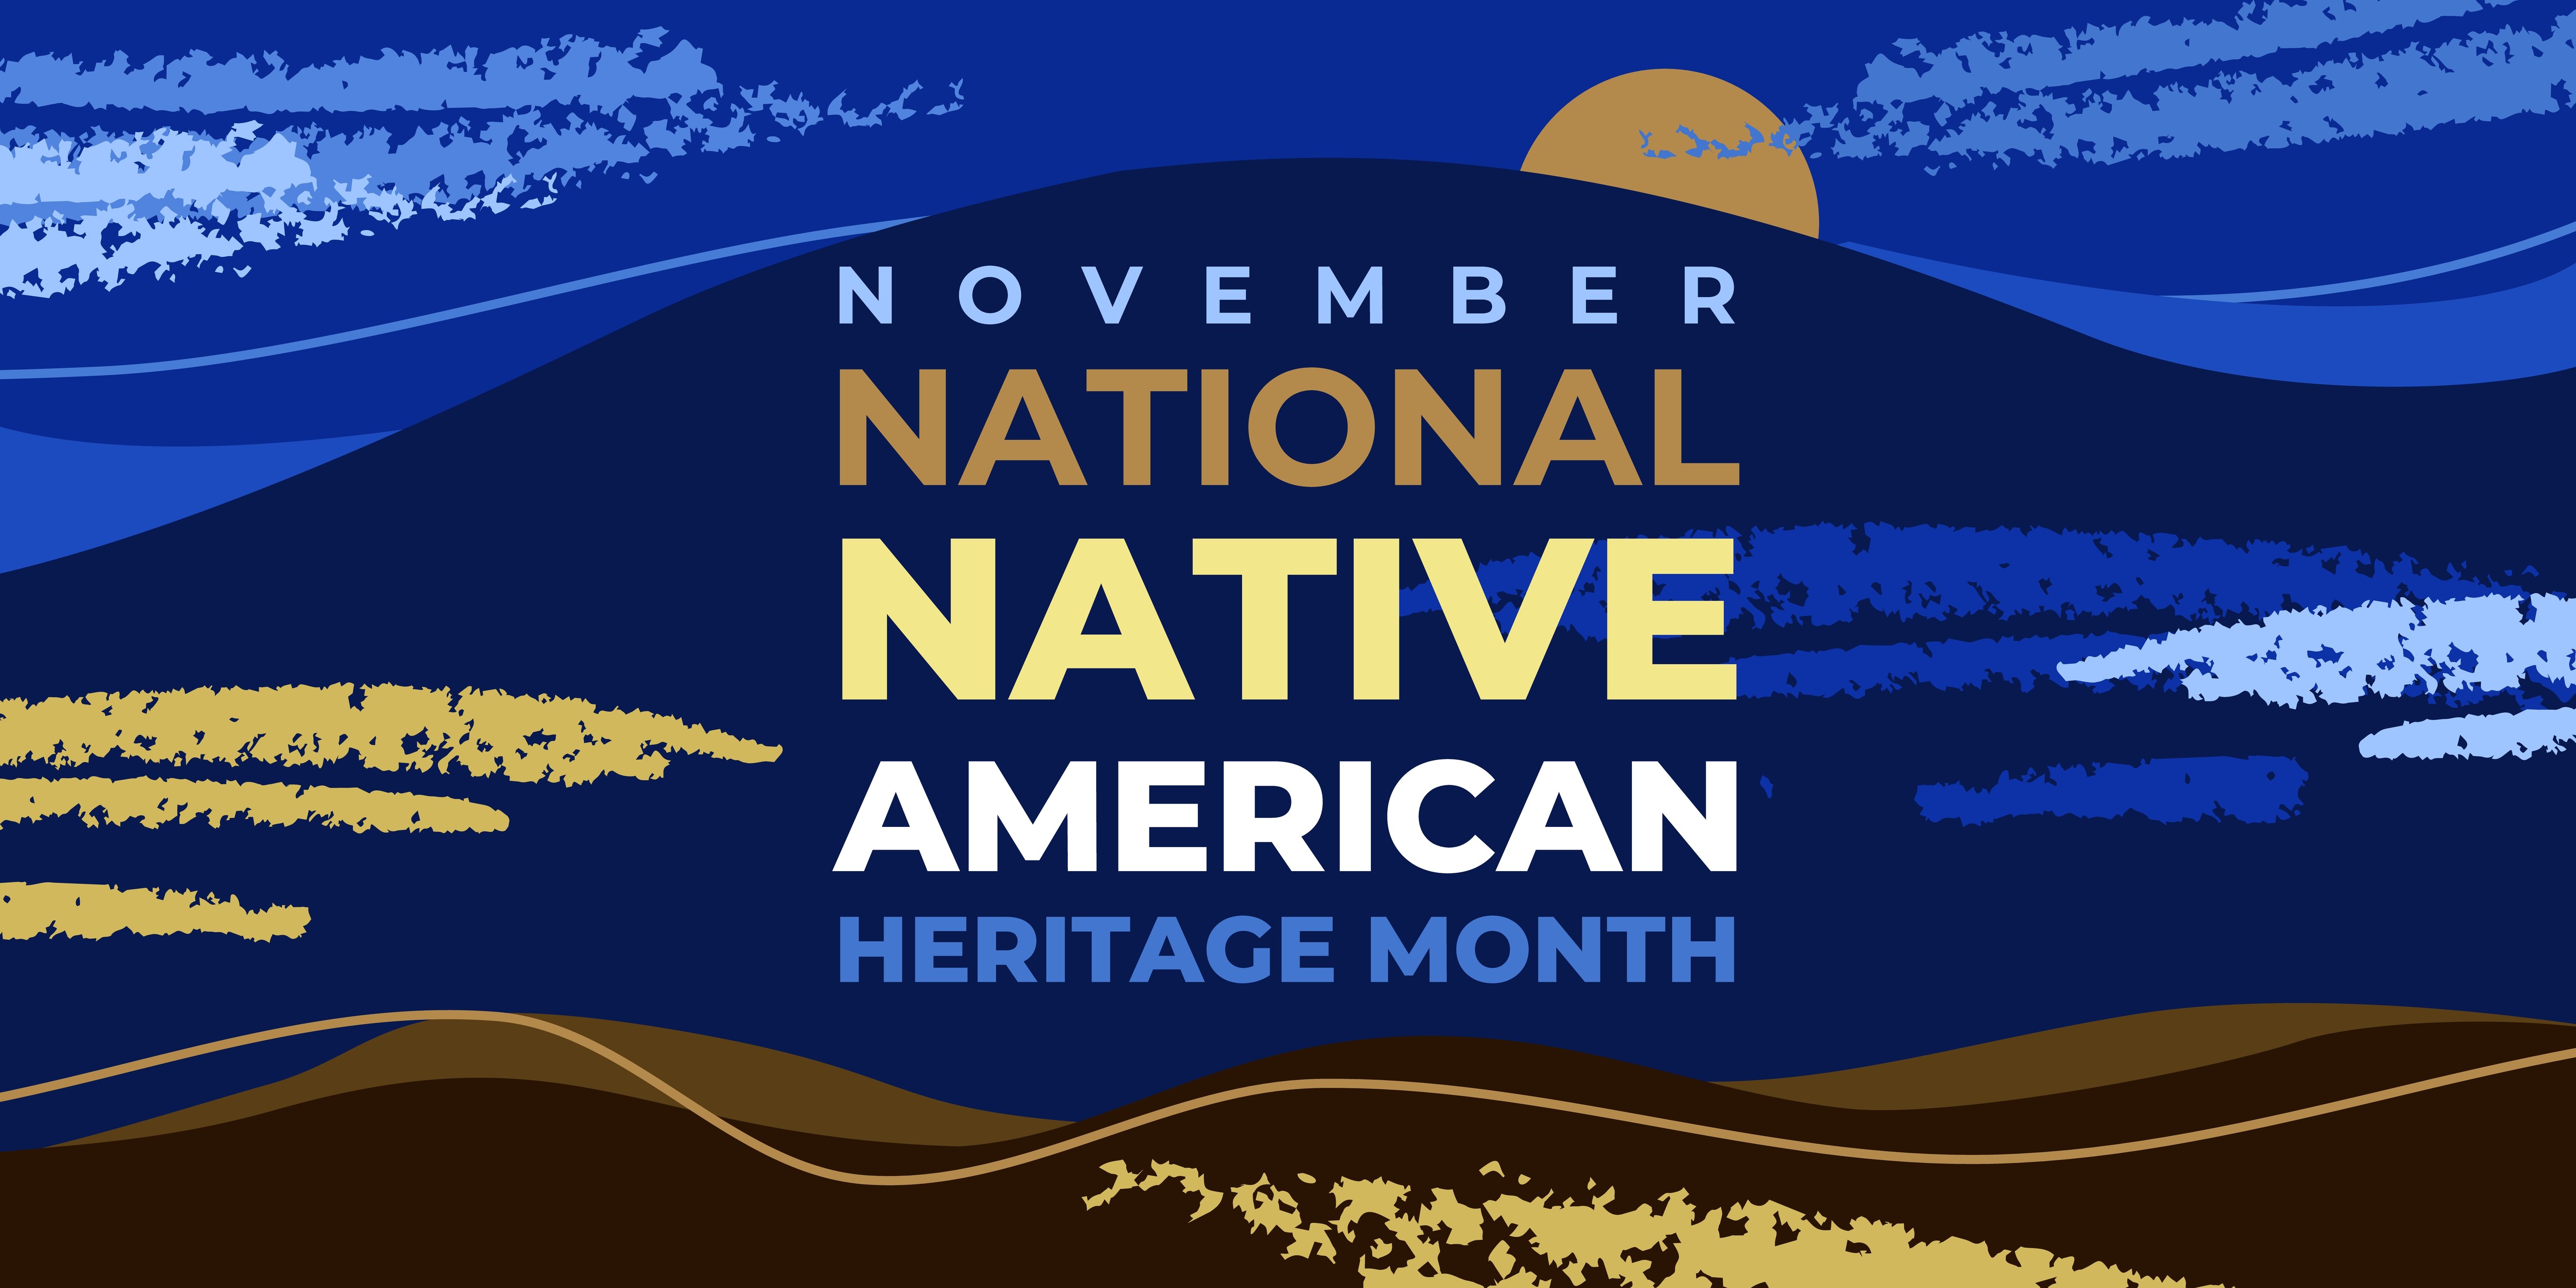 Native American Heritage Month image